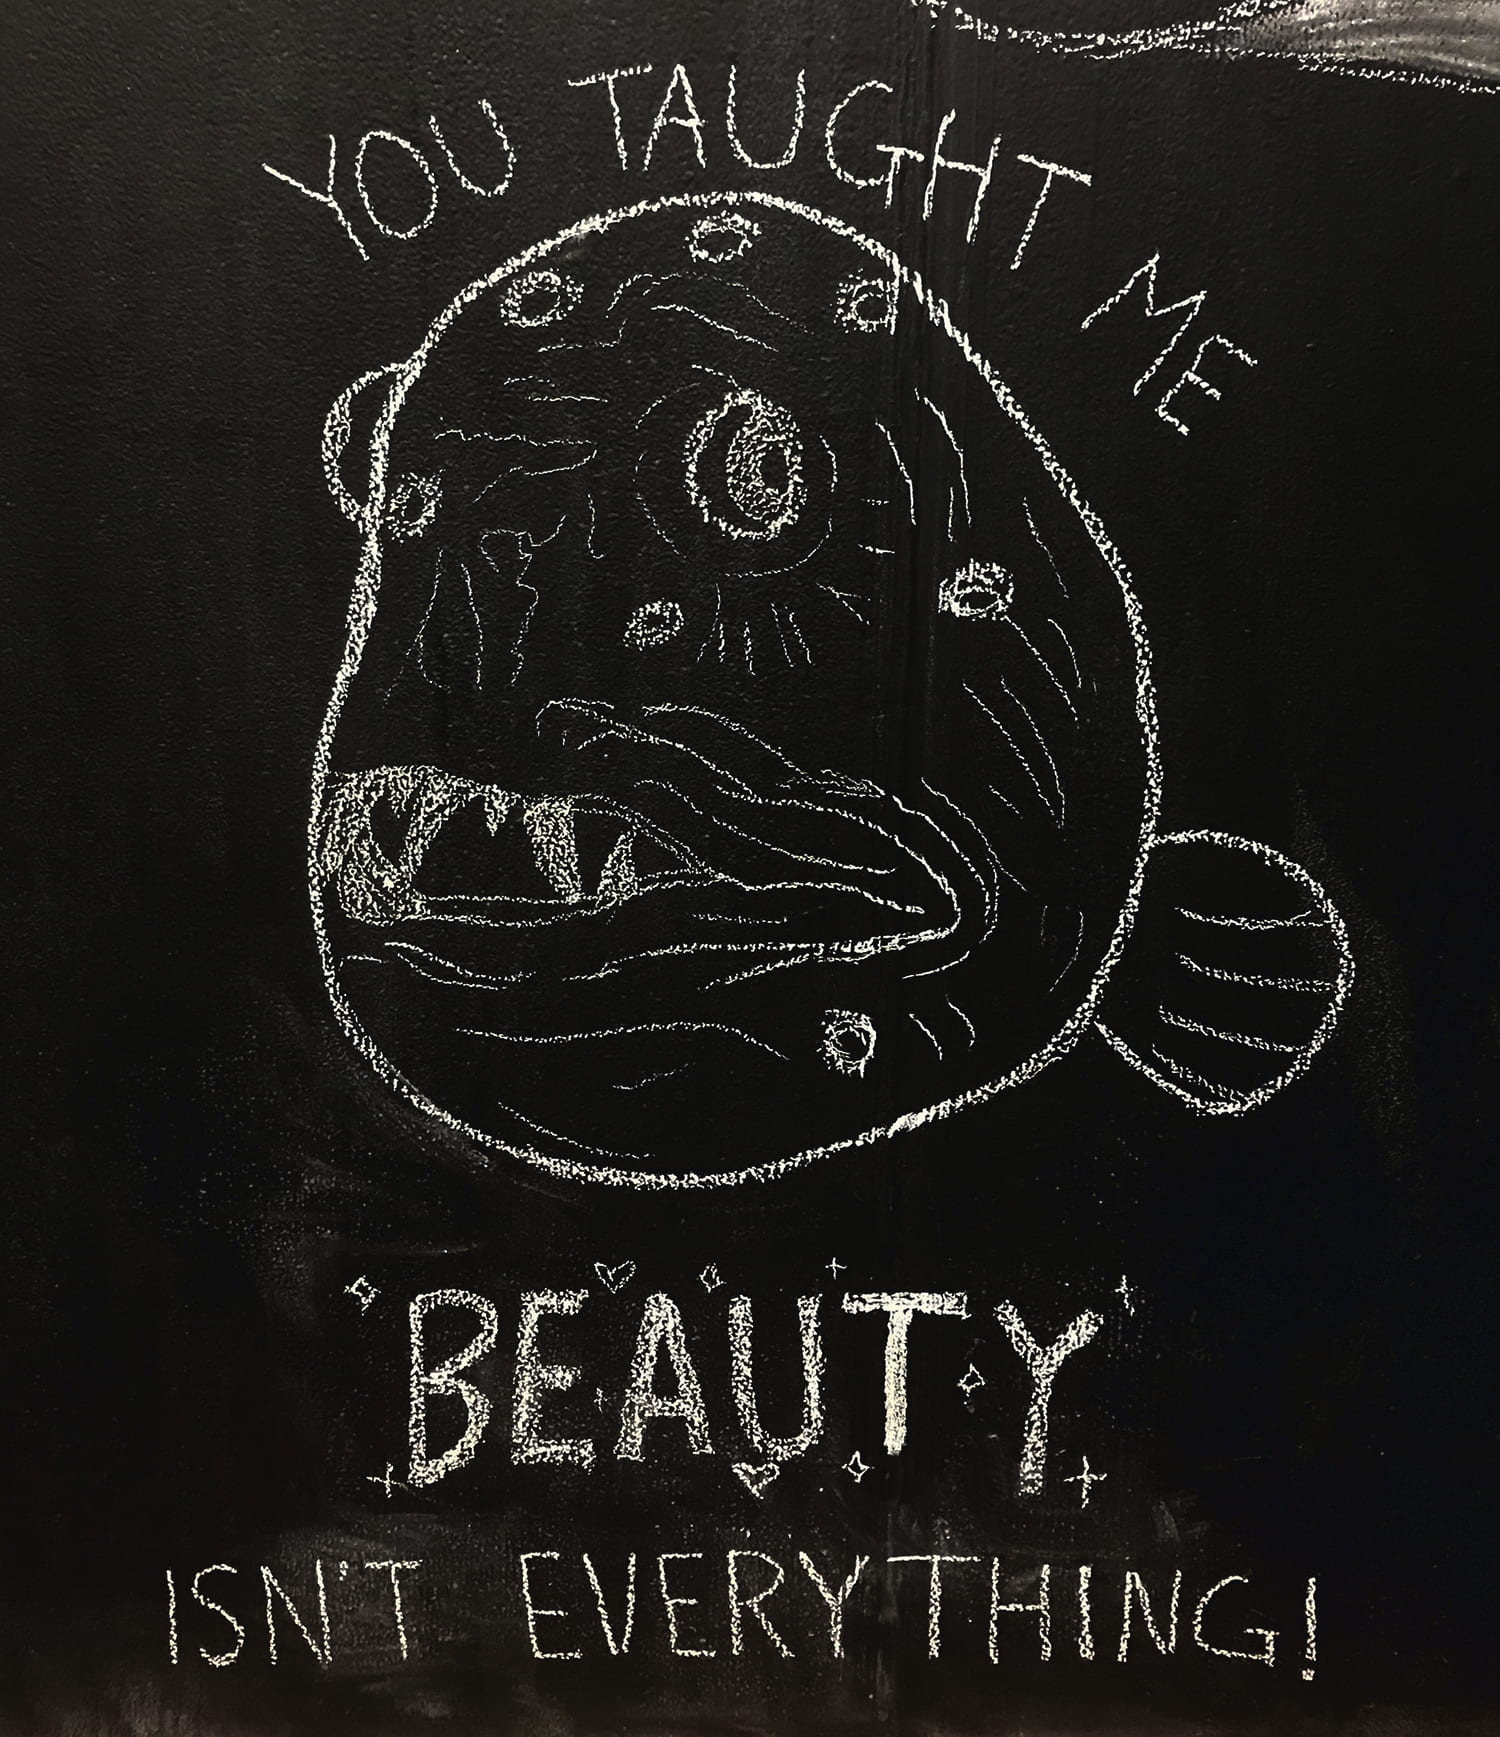 drawing of a round deep-sea fish with spots and large, jagged teeth. Words around it say "You taught me beauty isn't everything!"